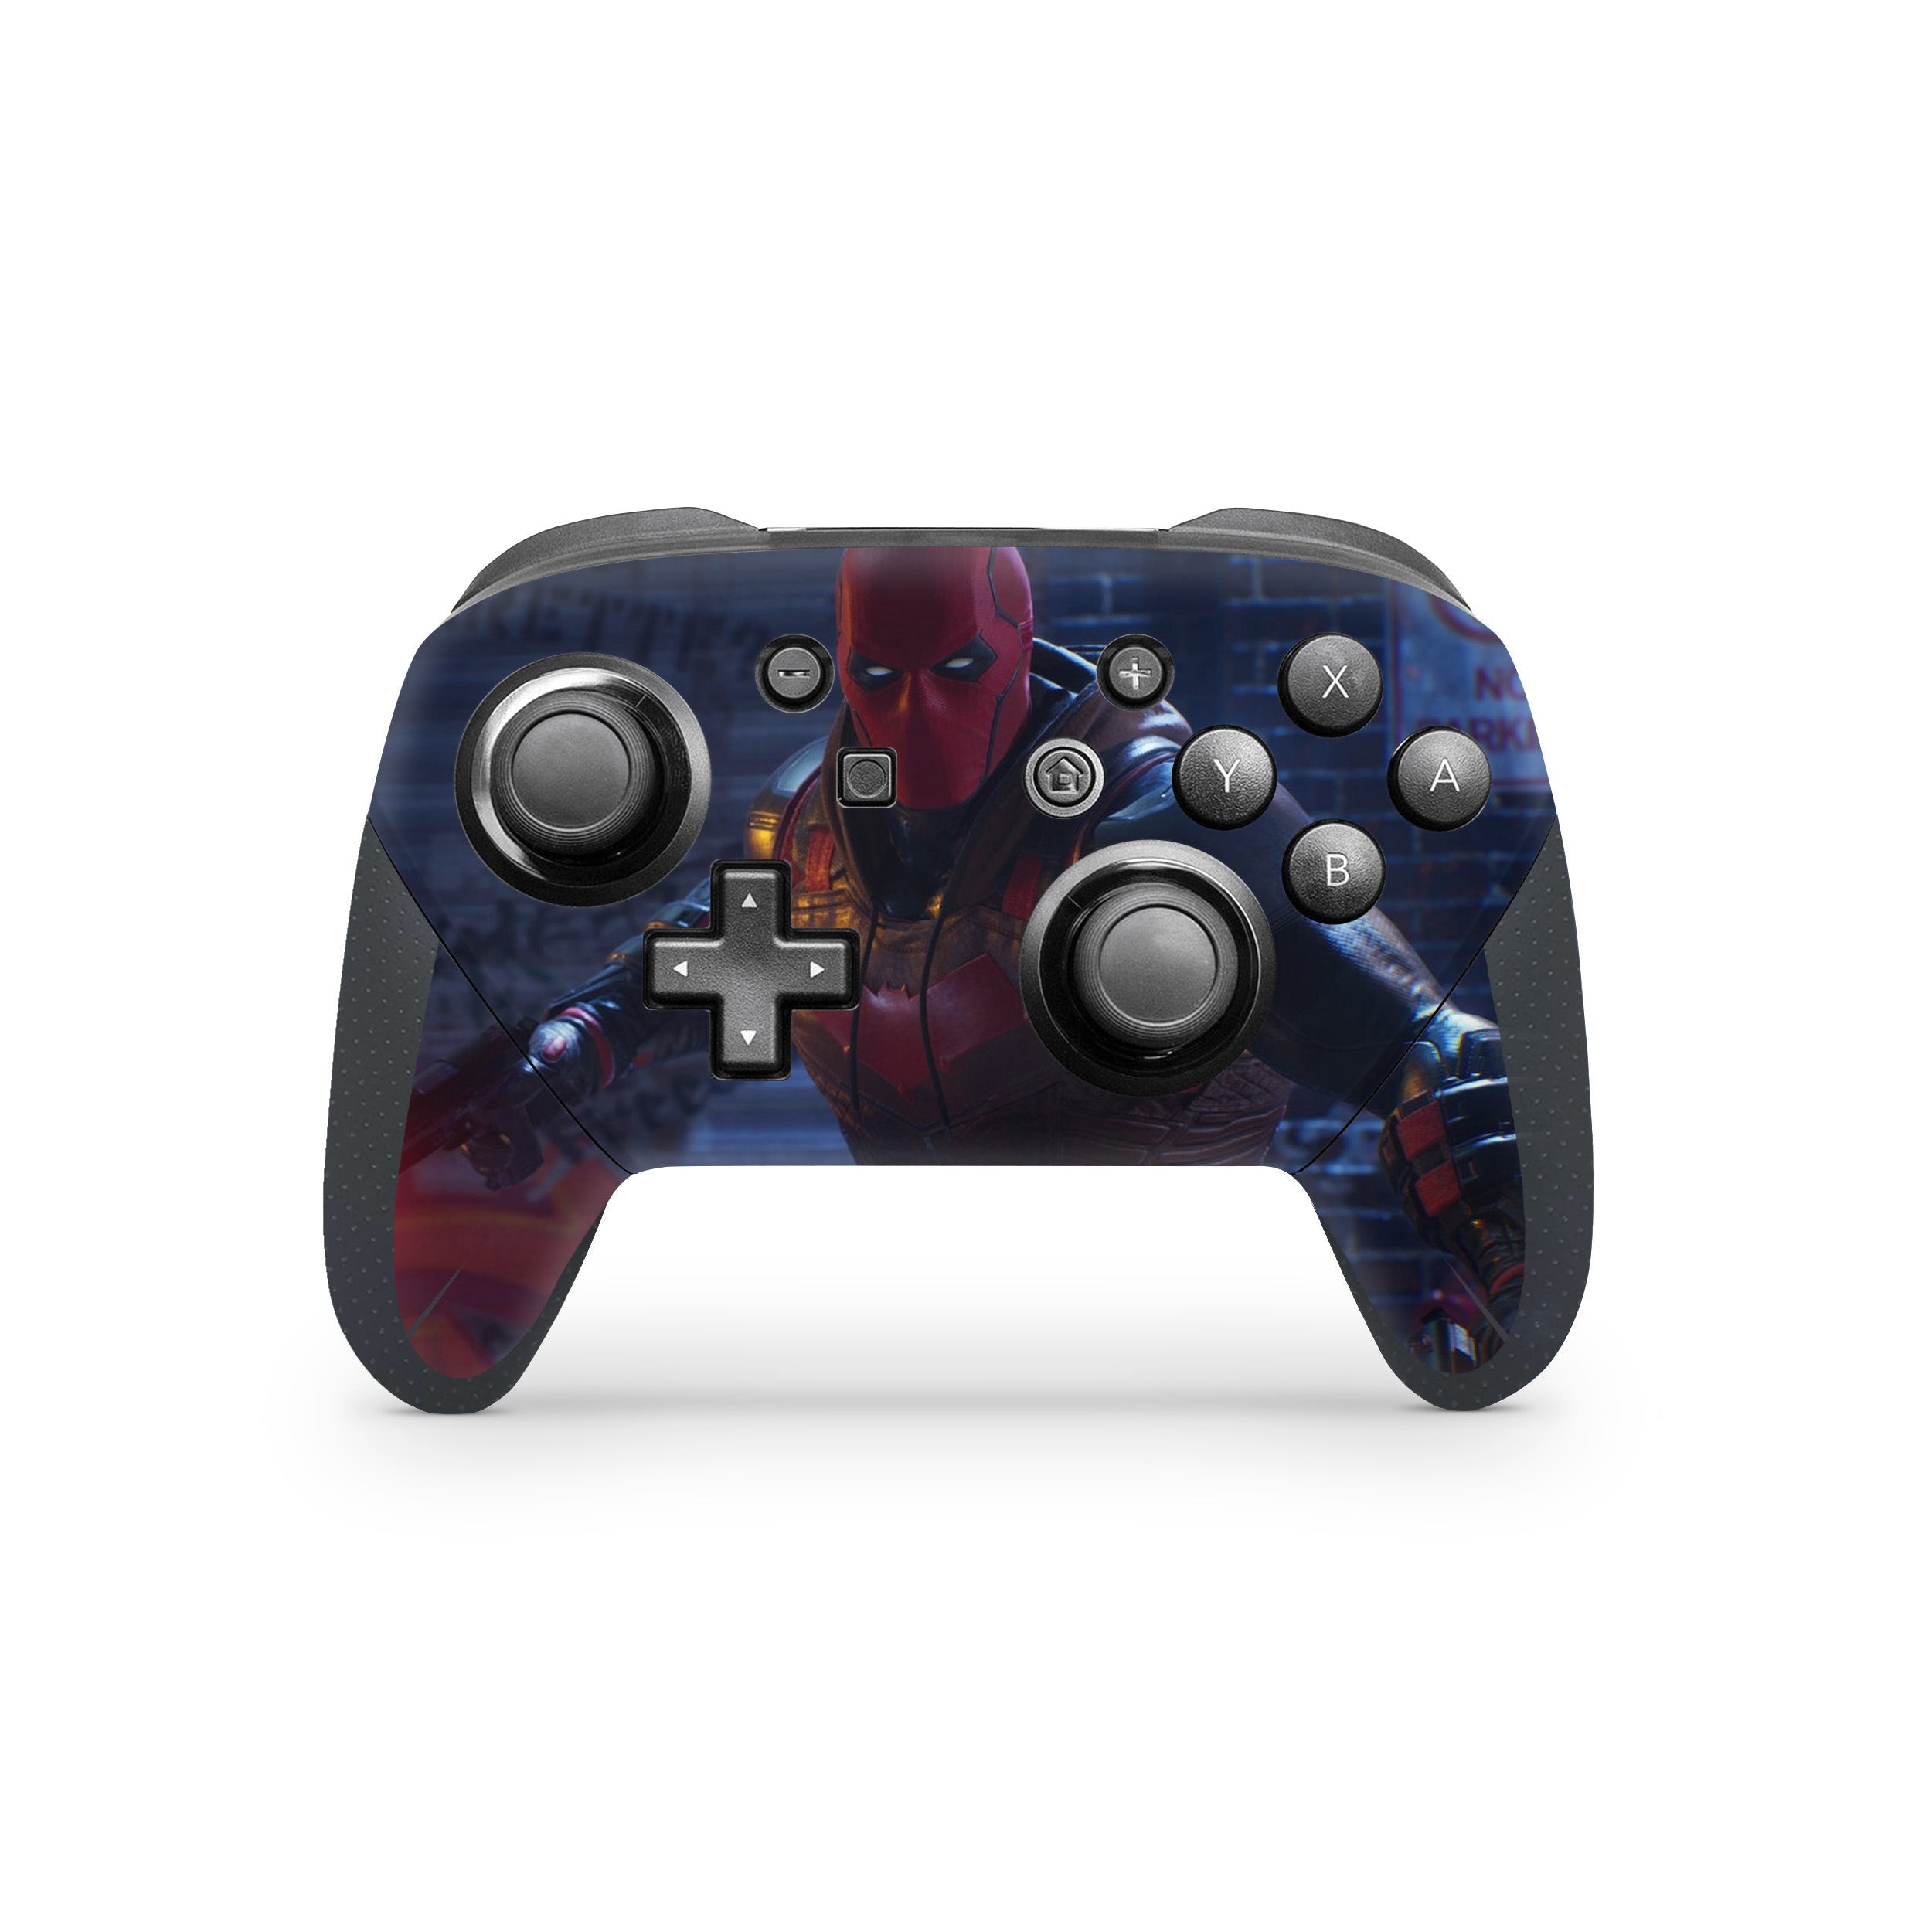 A video game skin featuring a DC Comics Red Hood design for the Switch Pro Controller.